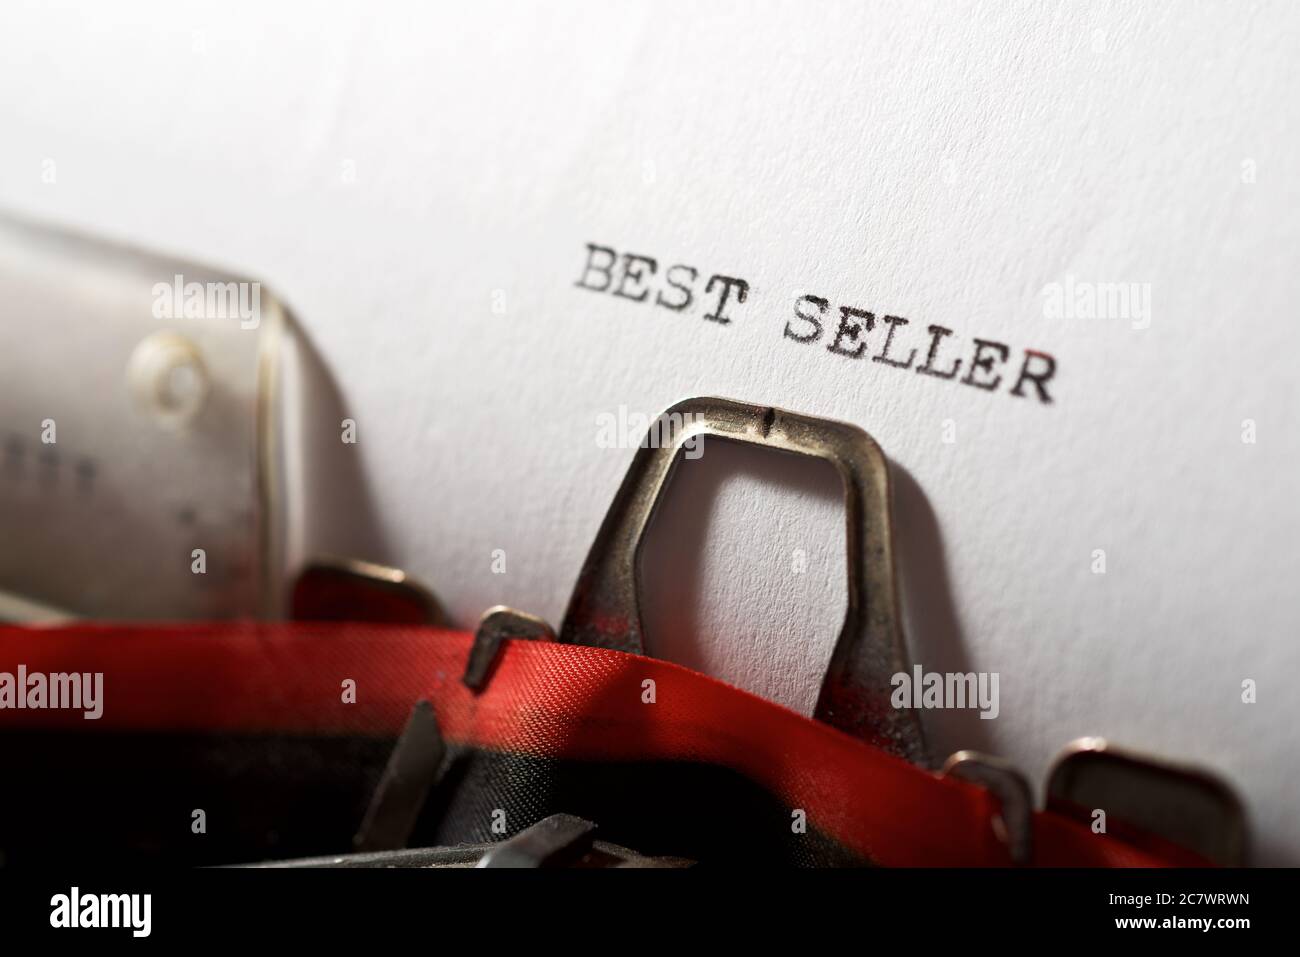 Best seller text written with a typewriter. Stock Photo